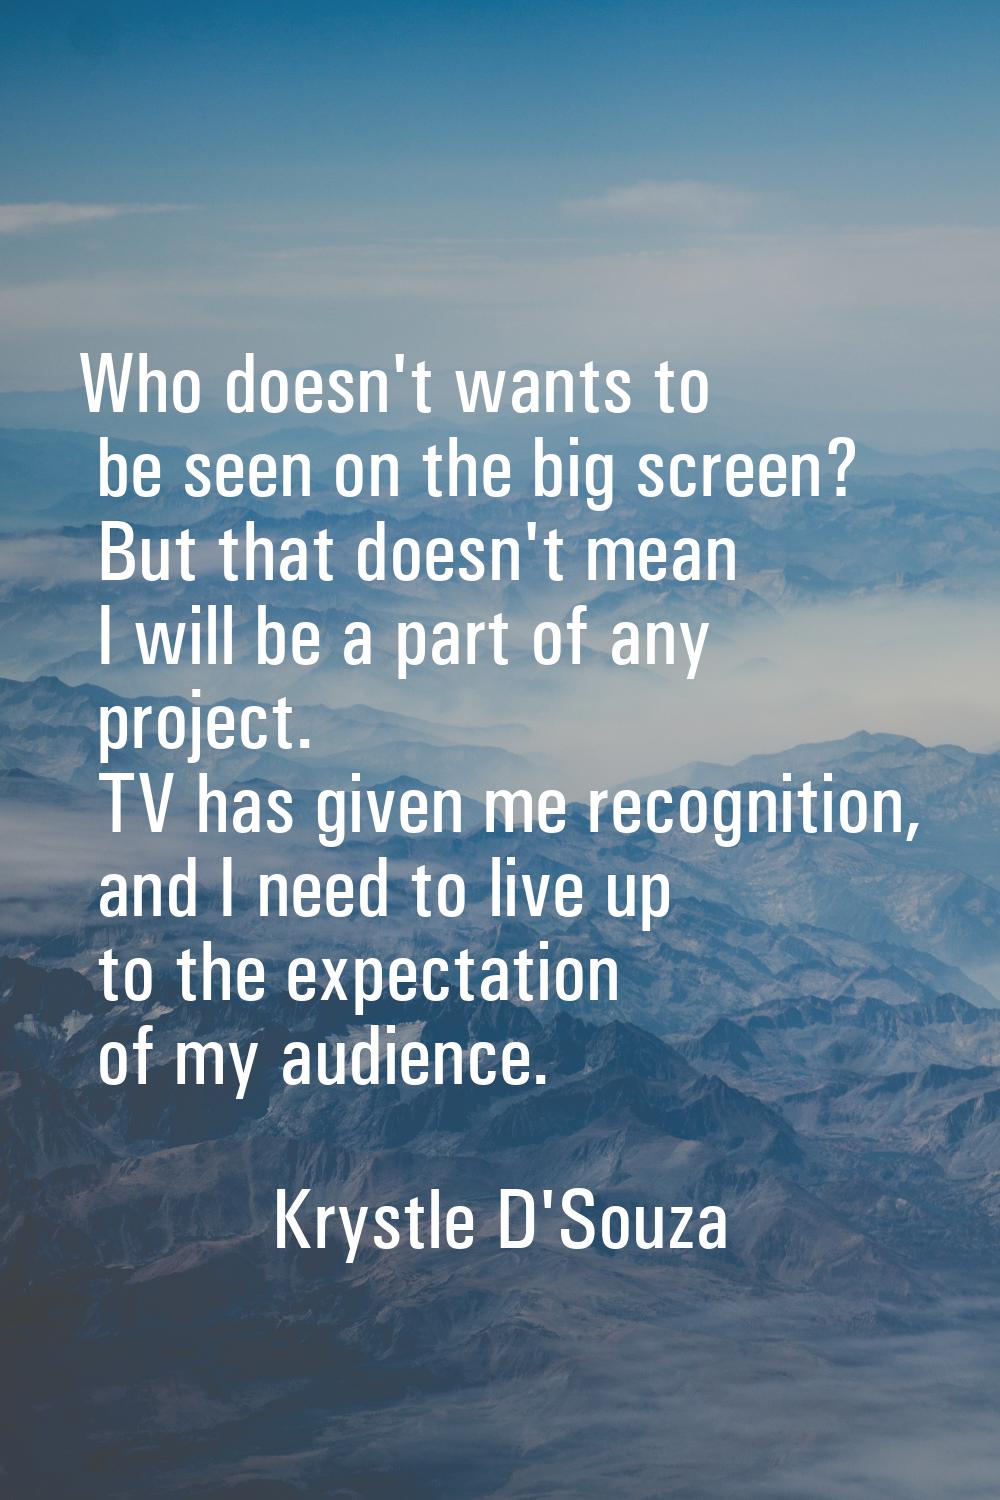 Who doesn't wants to be seen on the big screen? But that doesn't mean I will be a part of any proje